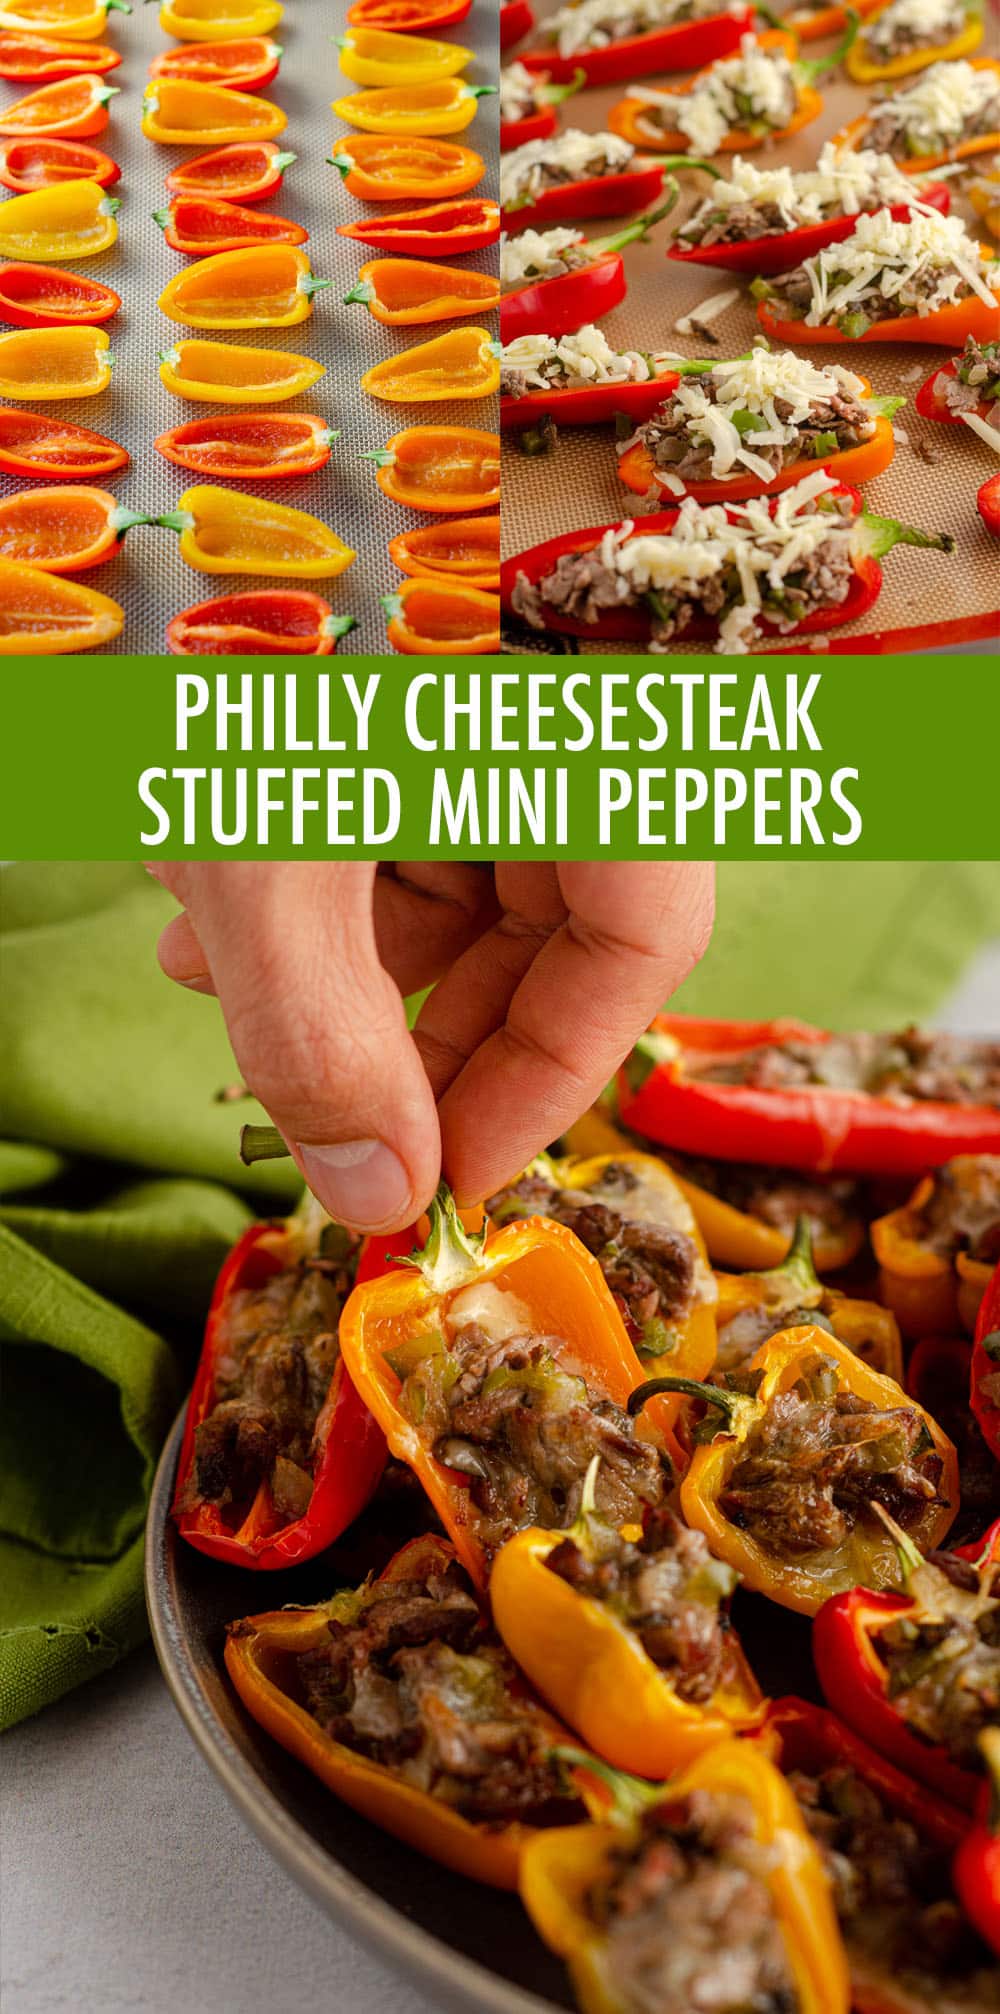 Don't let the "mini" part fool you-- these bite-size peppers are packed with tons of flavor! Recipe includes instructions for four large Philly cheesesteak stuffed peppers. via @frshaprilflours